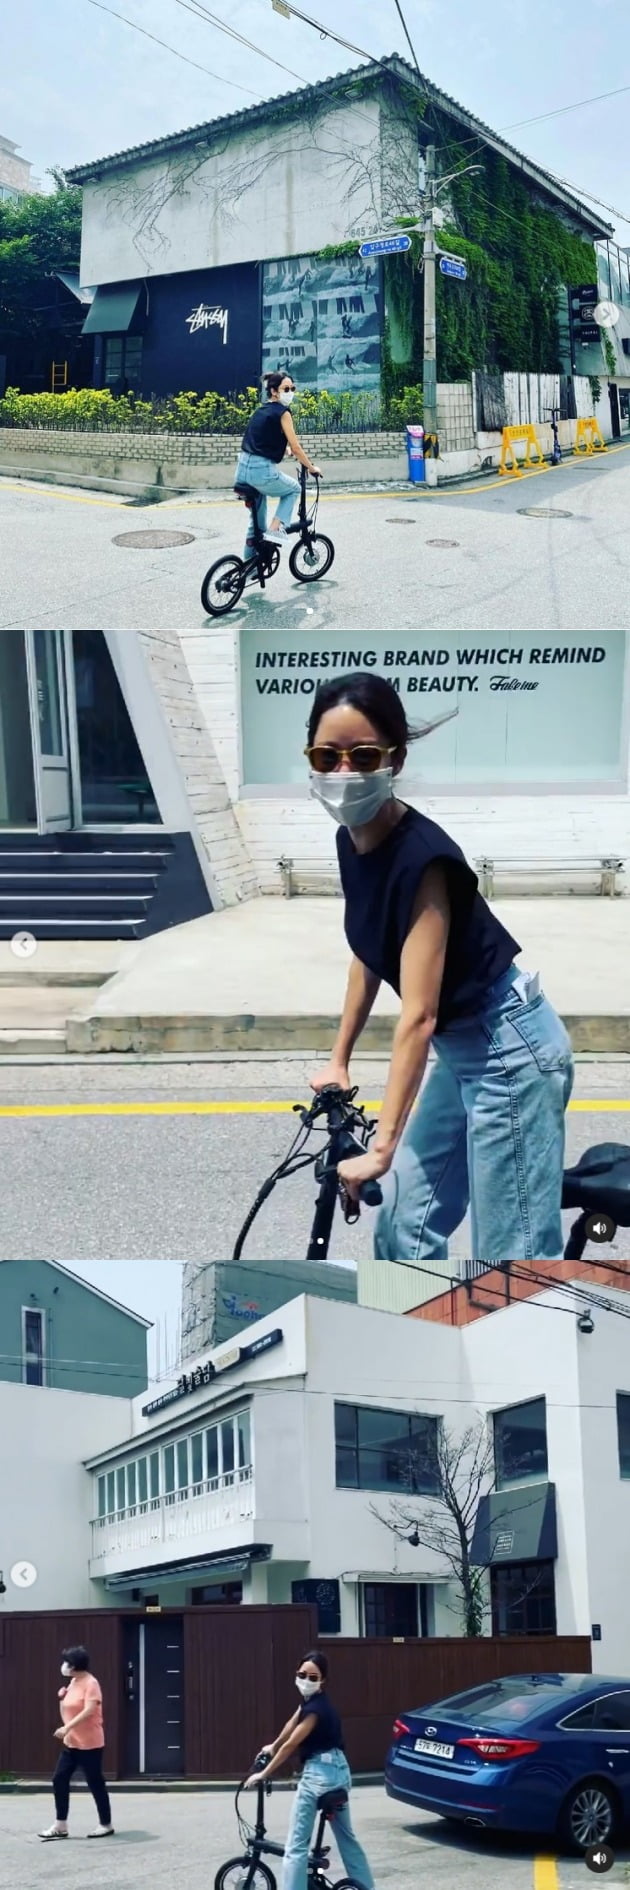 Actor Jeon Hye-bin shares a joyful moment of everyday lifeJeon Hye-bin posted on her Instagram page on Thursday: Its raining and its clunky.Jeon Hye-bin in the picture and video posted together is riding a bicycle on the streets of Apgujeong.She looks excited as she runs the streets with her bicycle in a comfortable T-shirt and jeans.Jeon Hye-bin is currently appearing on KBS2 weekend Drama OK Photon; in 2019, she married a two-year-old Dentist.